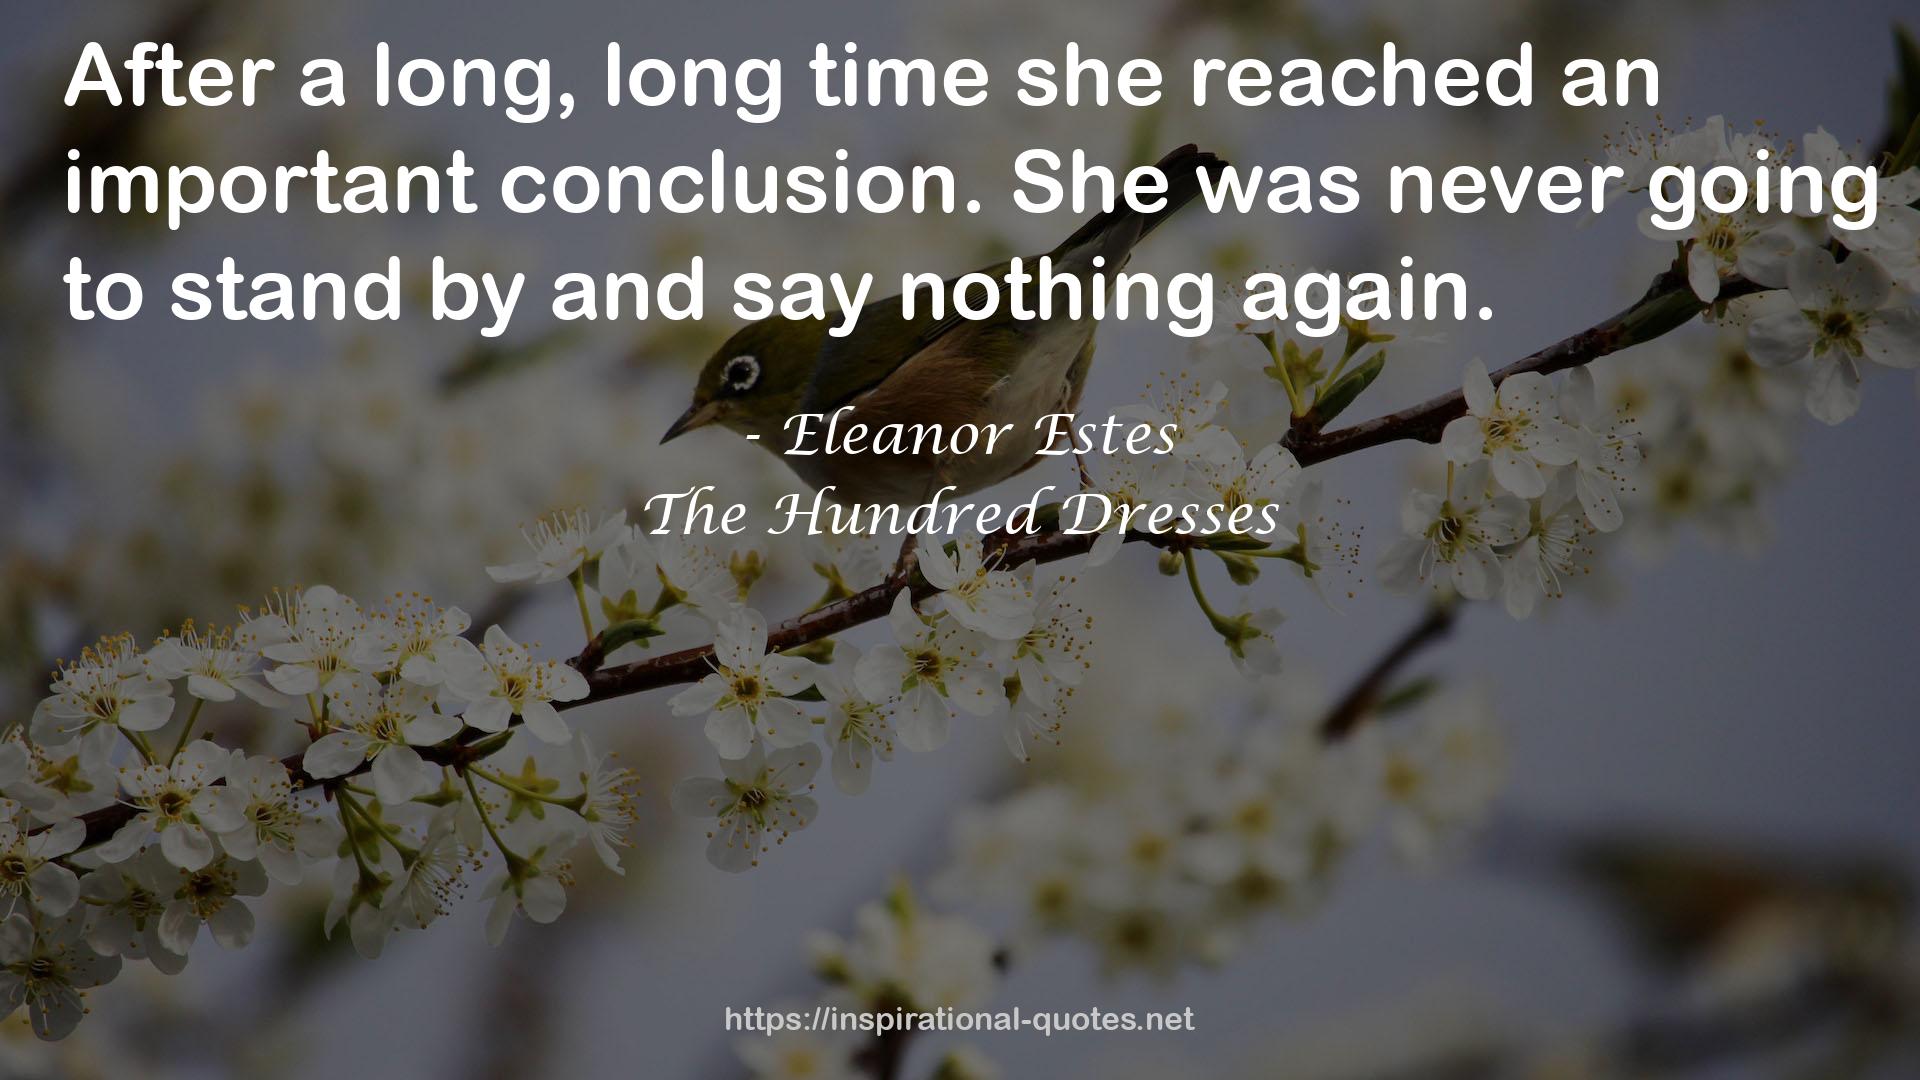 The Hundred Dresses QUOTES